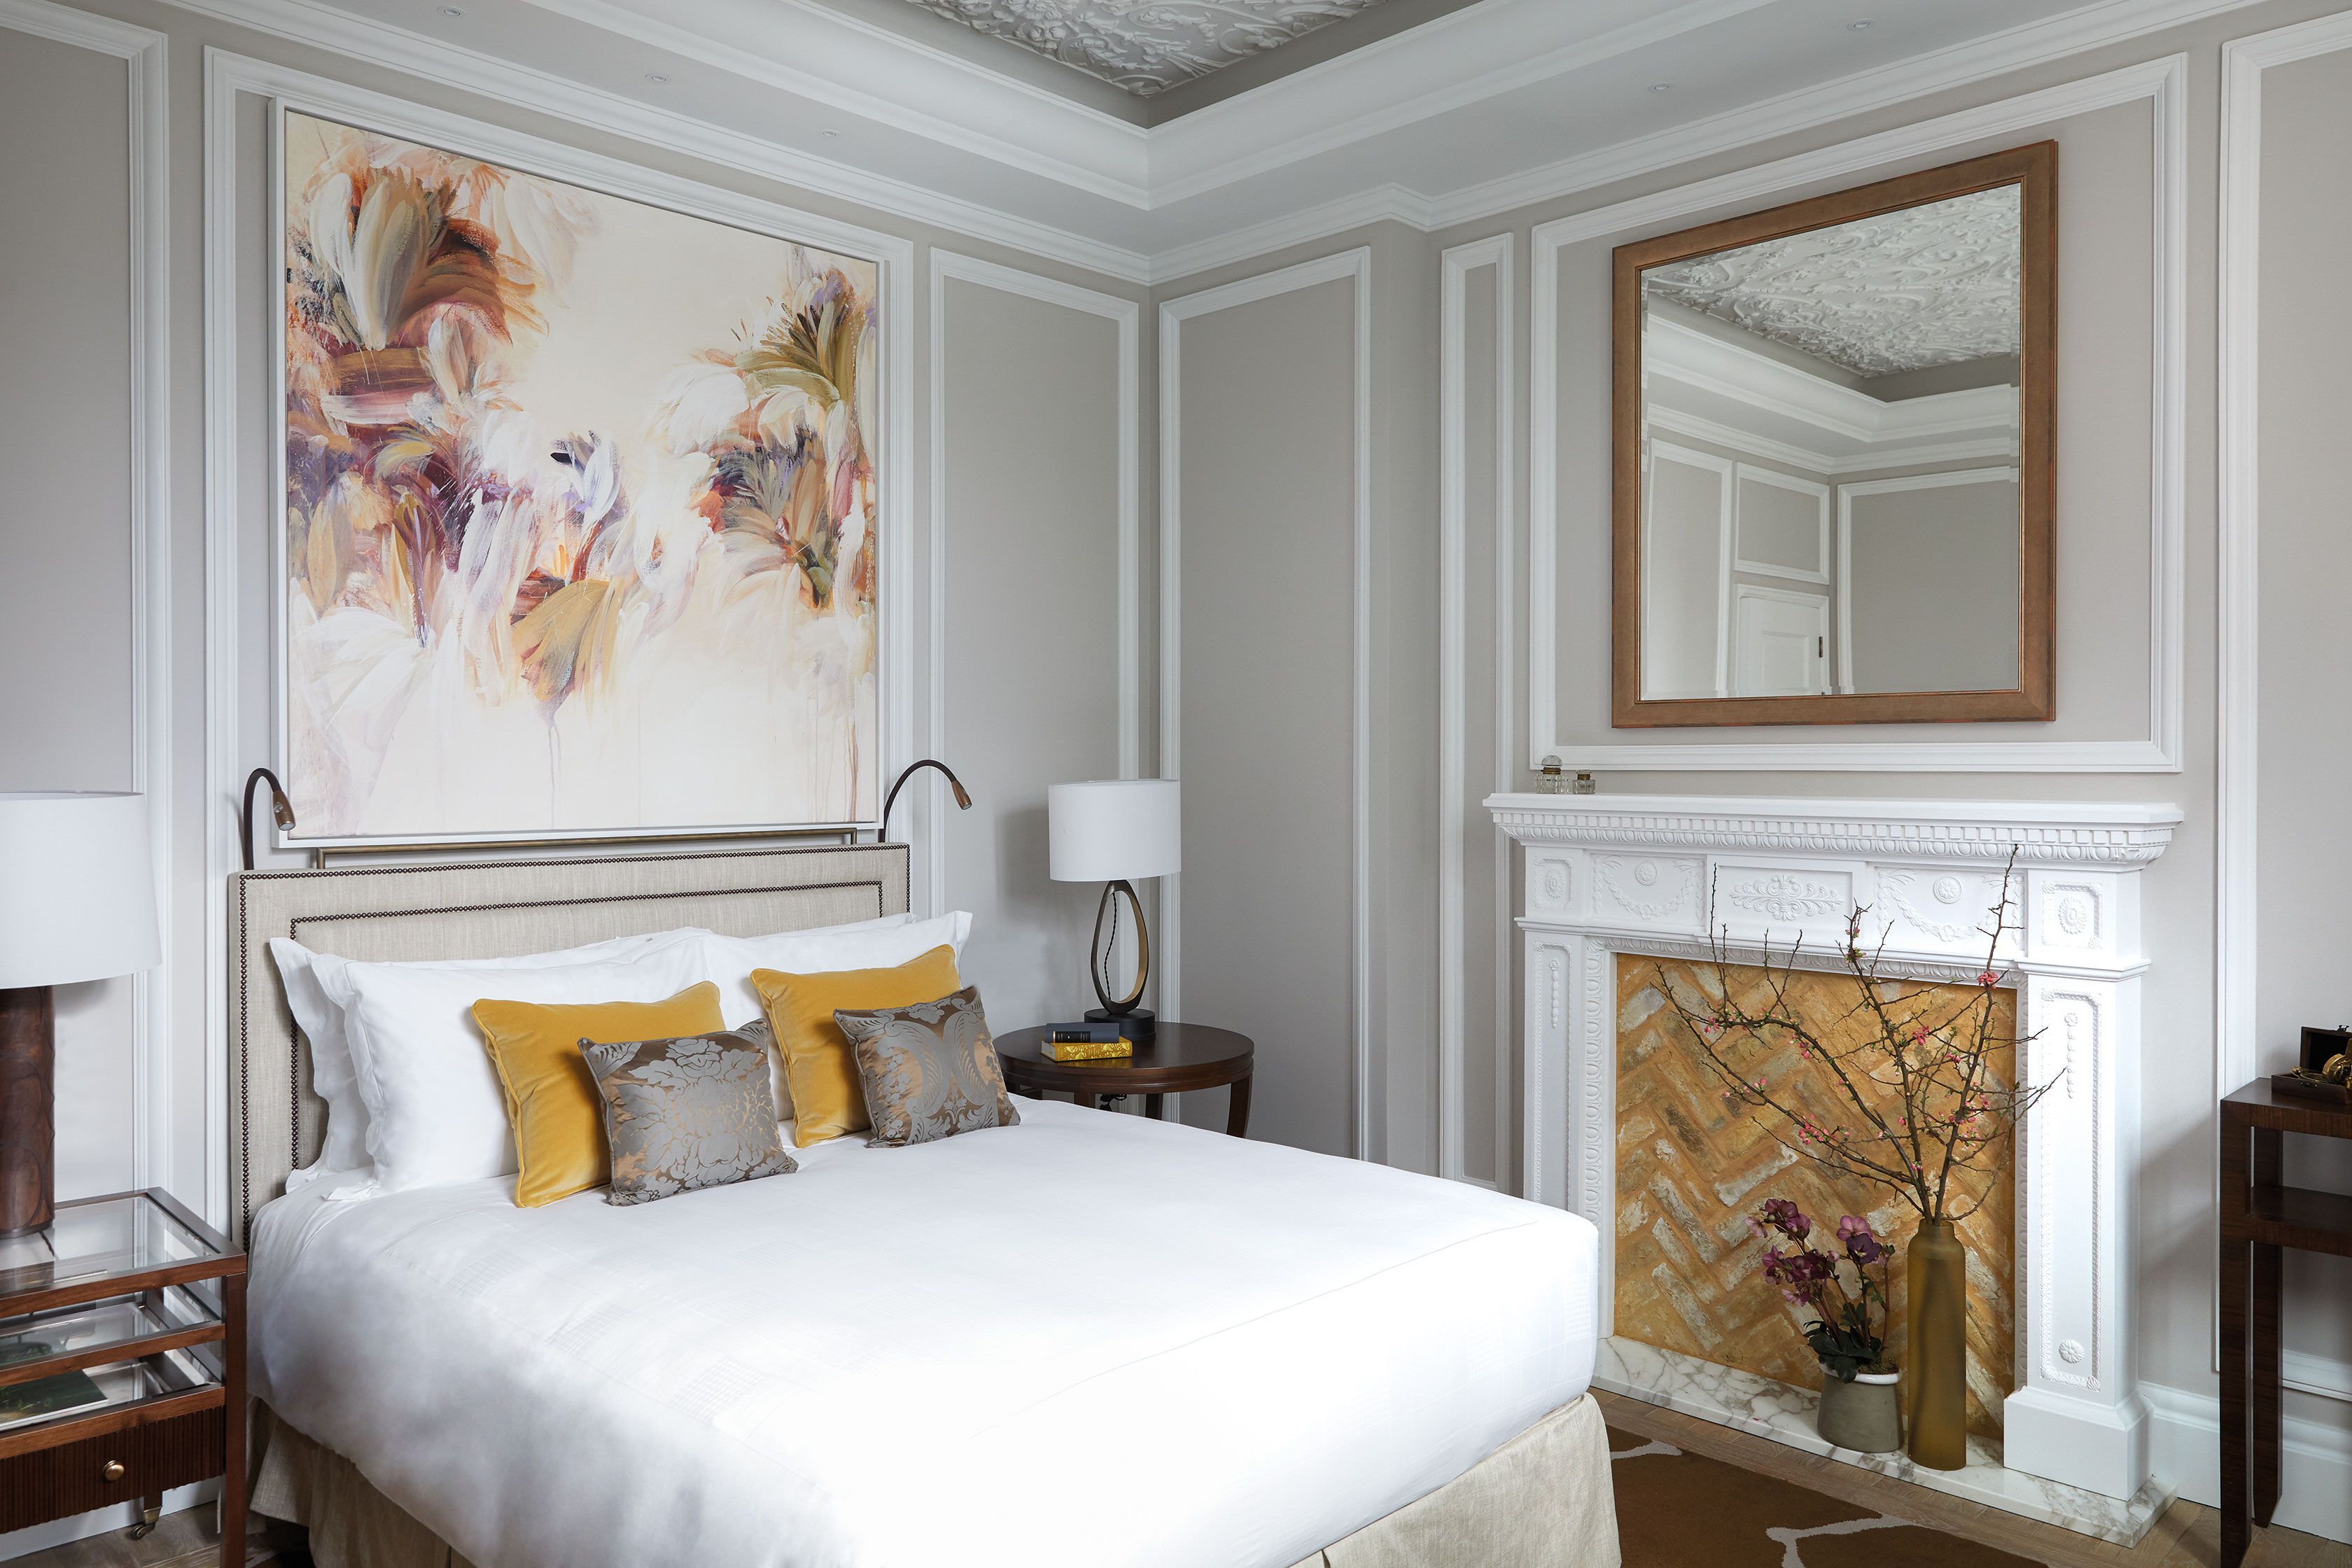 A stylish retreat in the heart of Chelsea, The Cadogan, A Belmond